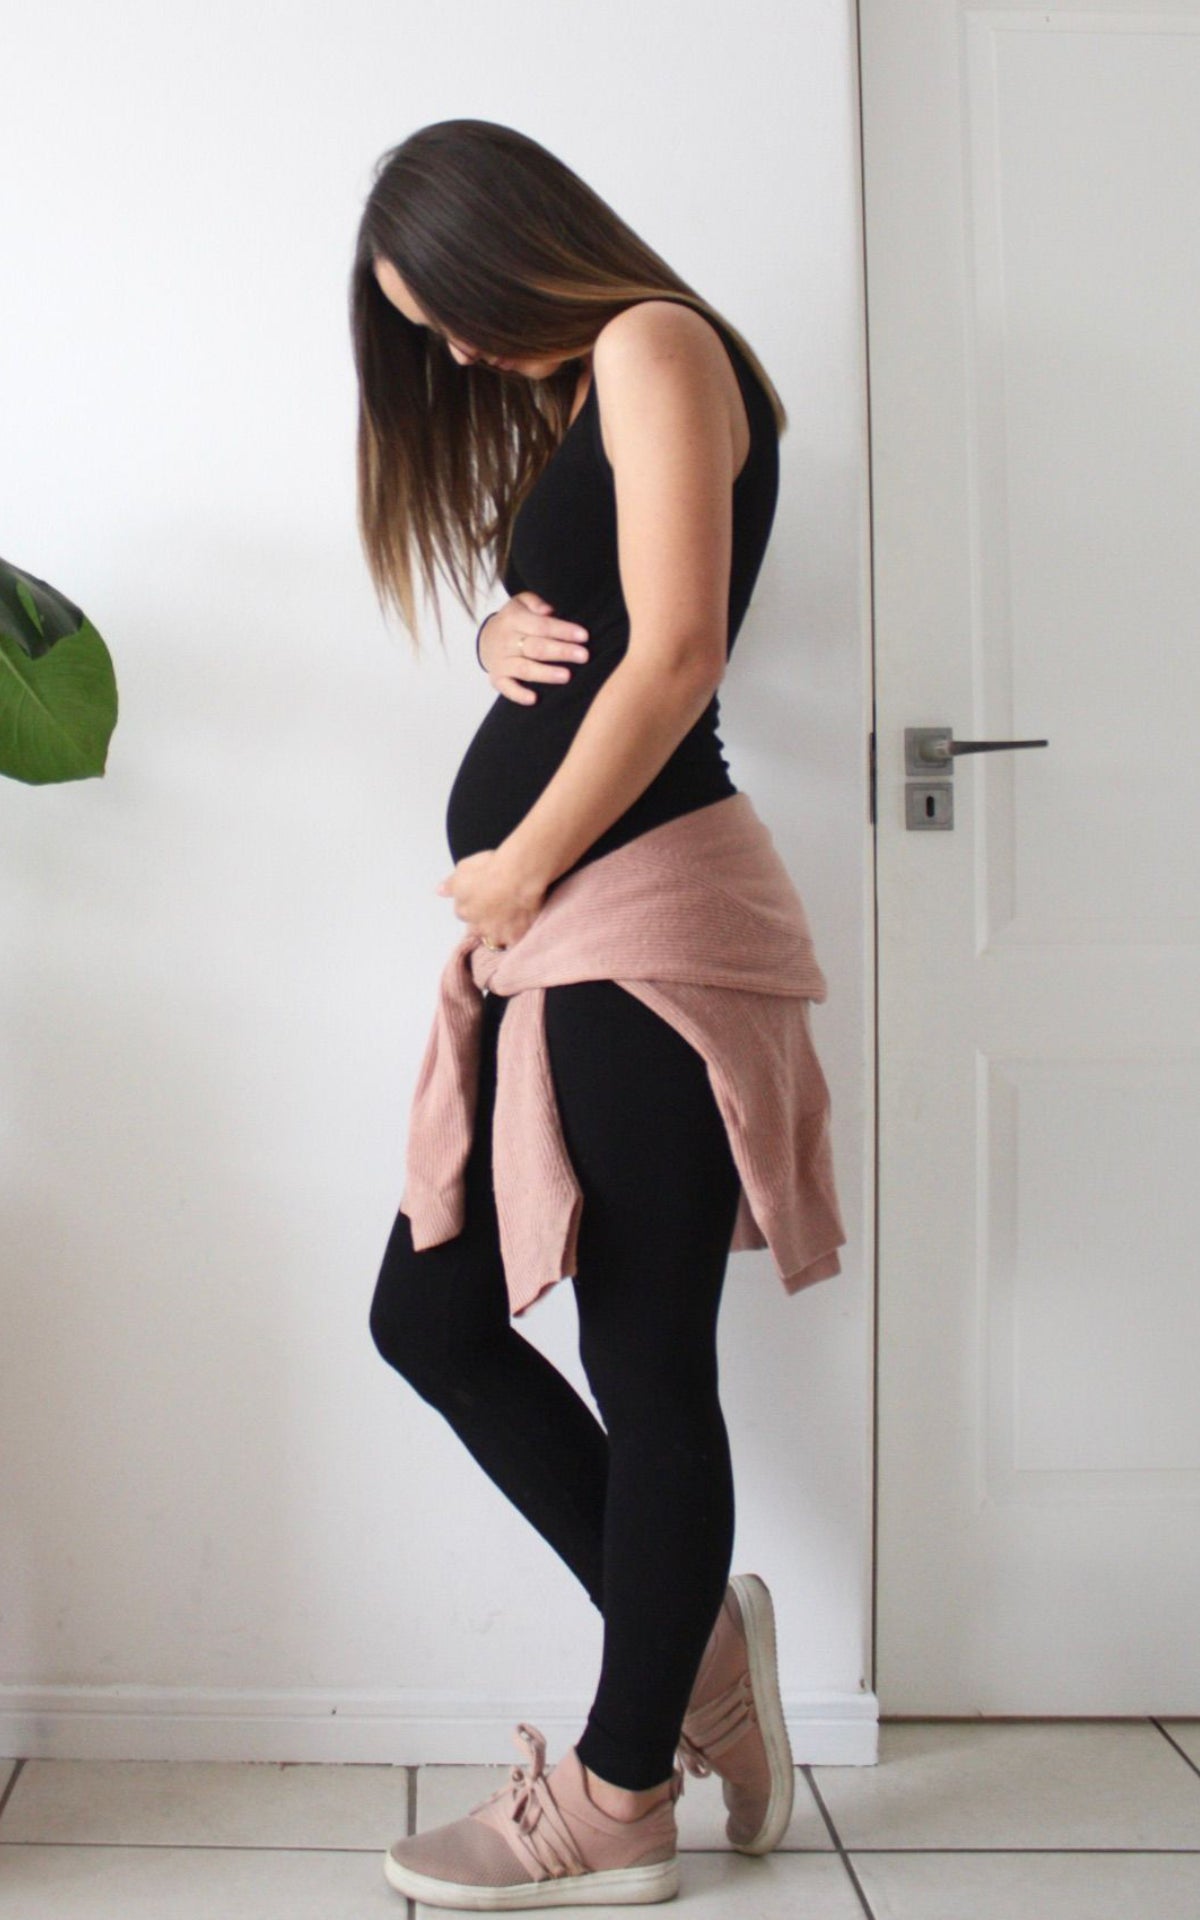 Yummy Maternity - Kicking back in comfort in Bamboo Nursing Cami and  Undies. Who needs anything else?! 💕